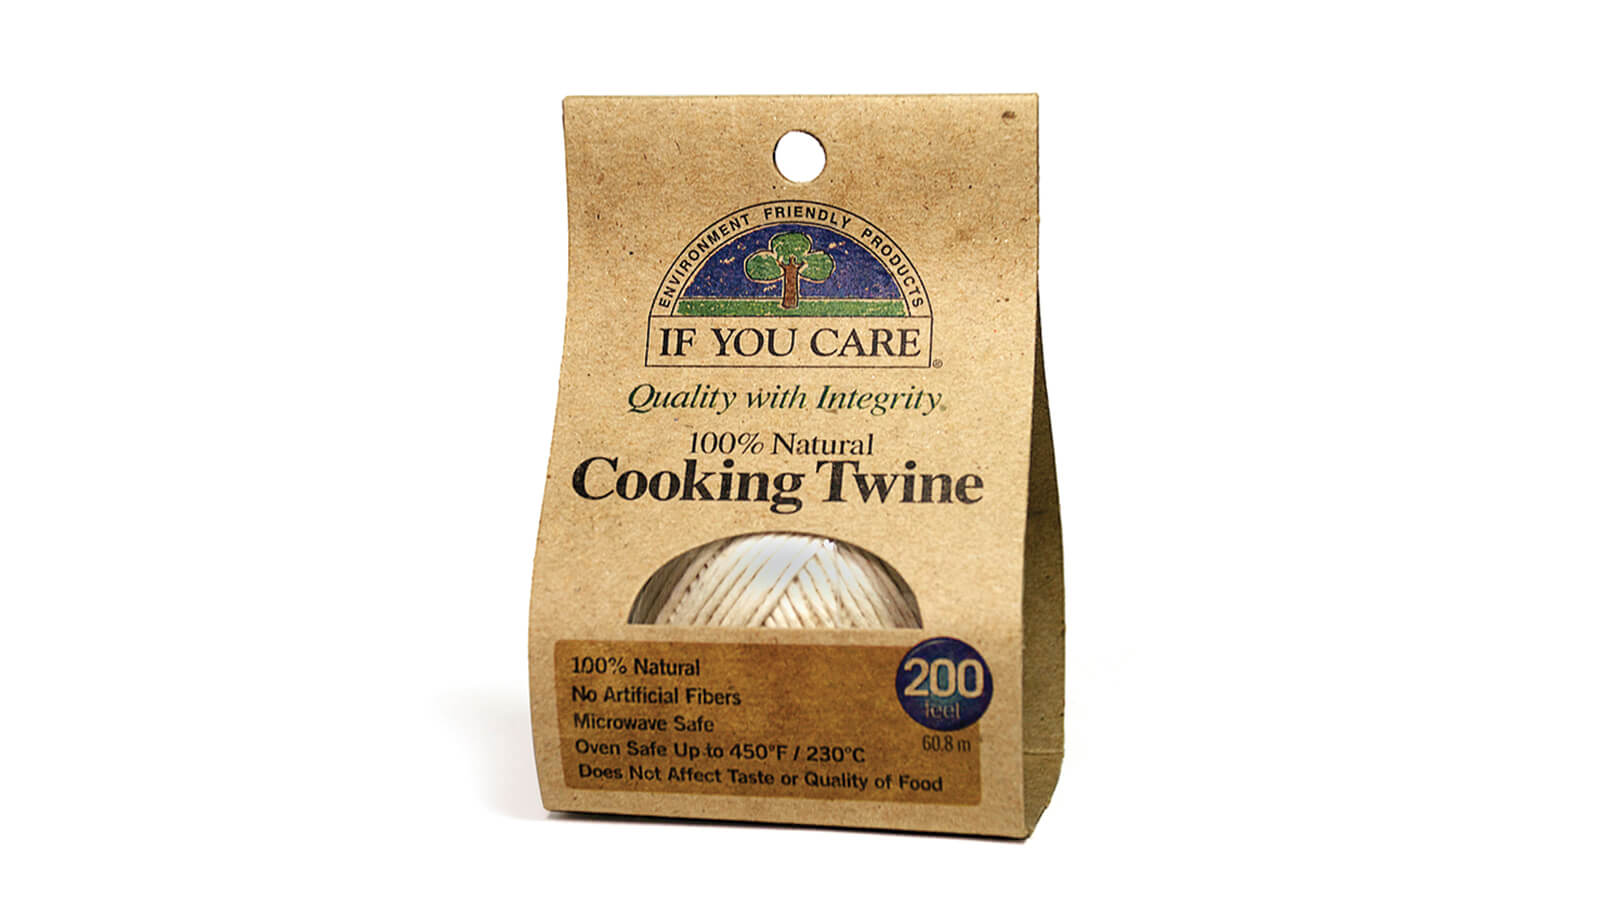 If You Care Cooking Twine